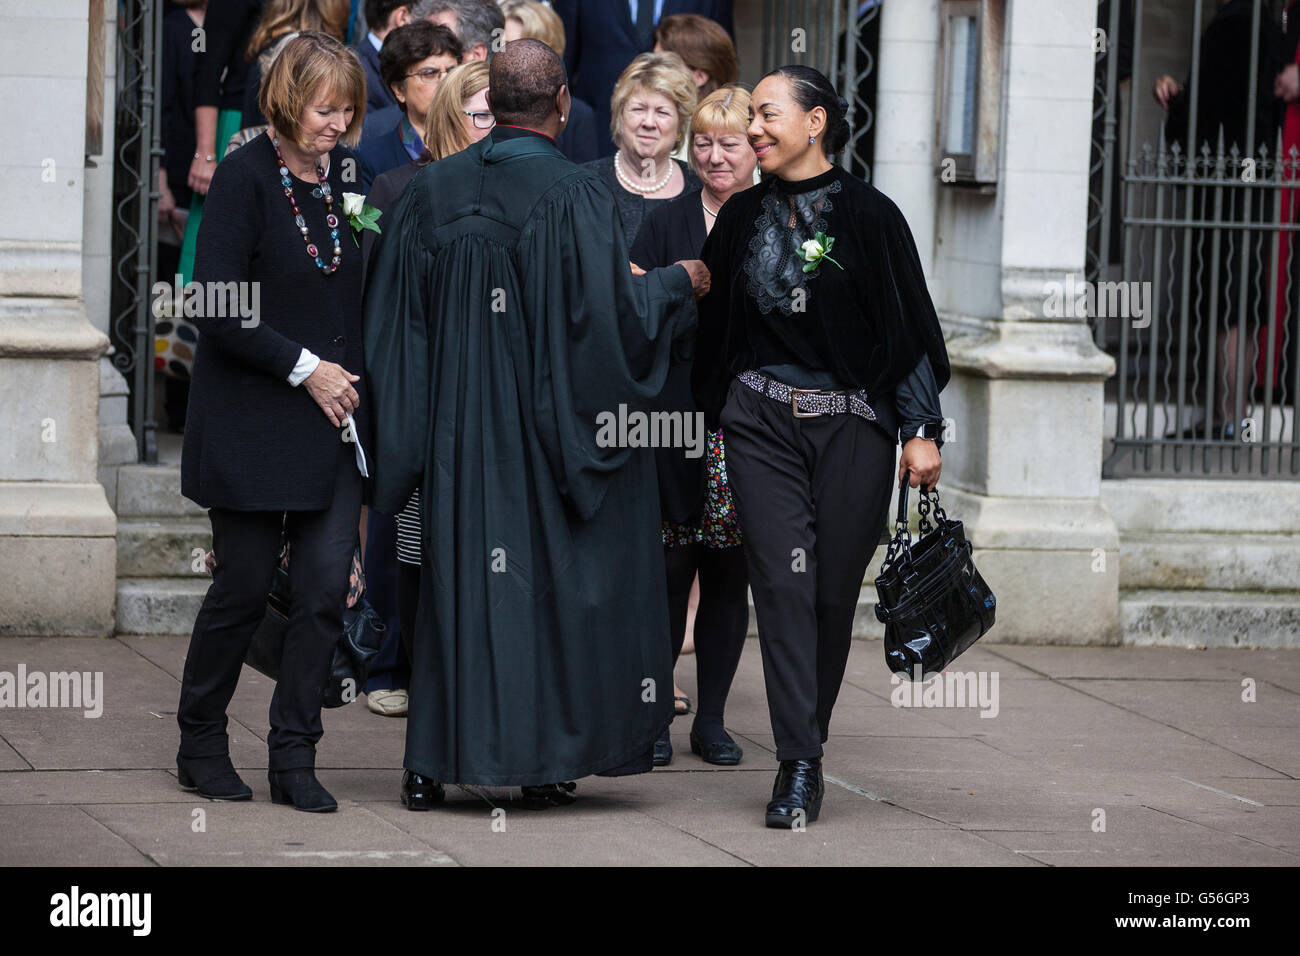 London, UK. 20th June, 2016. Harriet Harman MP and Baroness King of Bow leave St Margarets Church in Westminster, following a special service in memory of Jo Cox. Jo Cox was killed in her constituency of Batley and Spen on 16th June. Credit:  Mark Kerrison/Alamy Live News Stock Photo